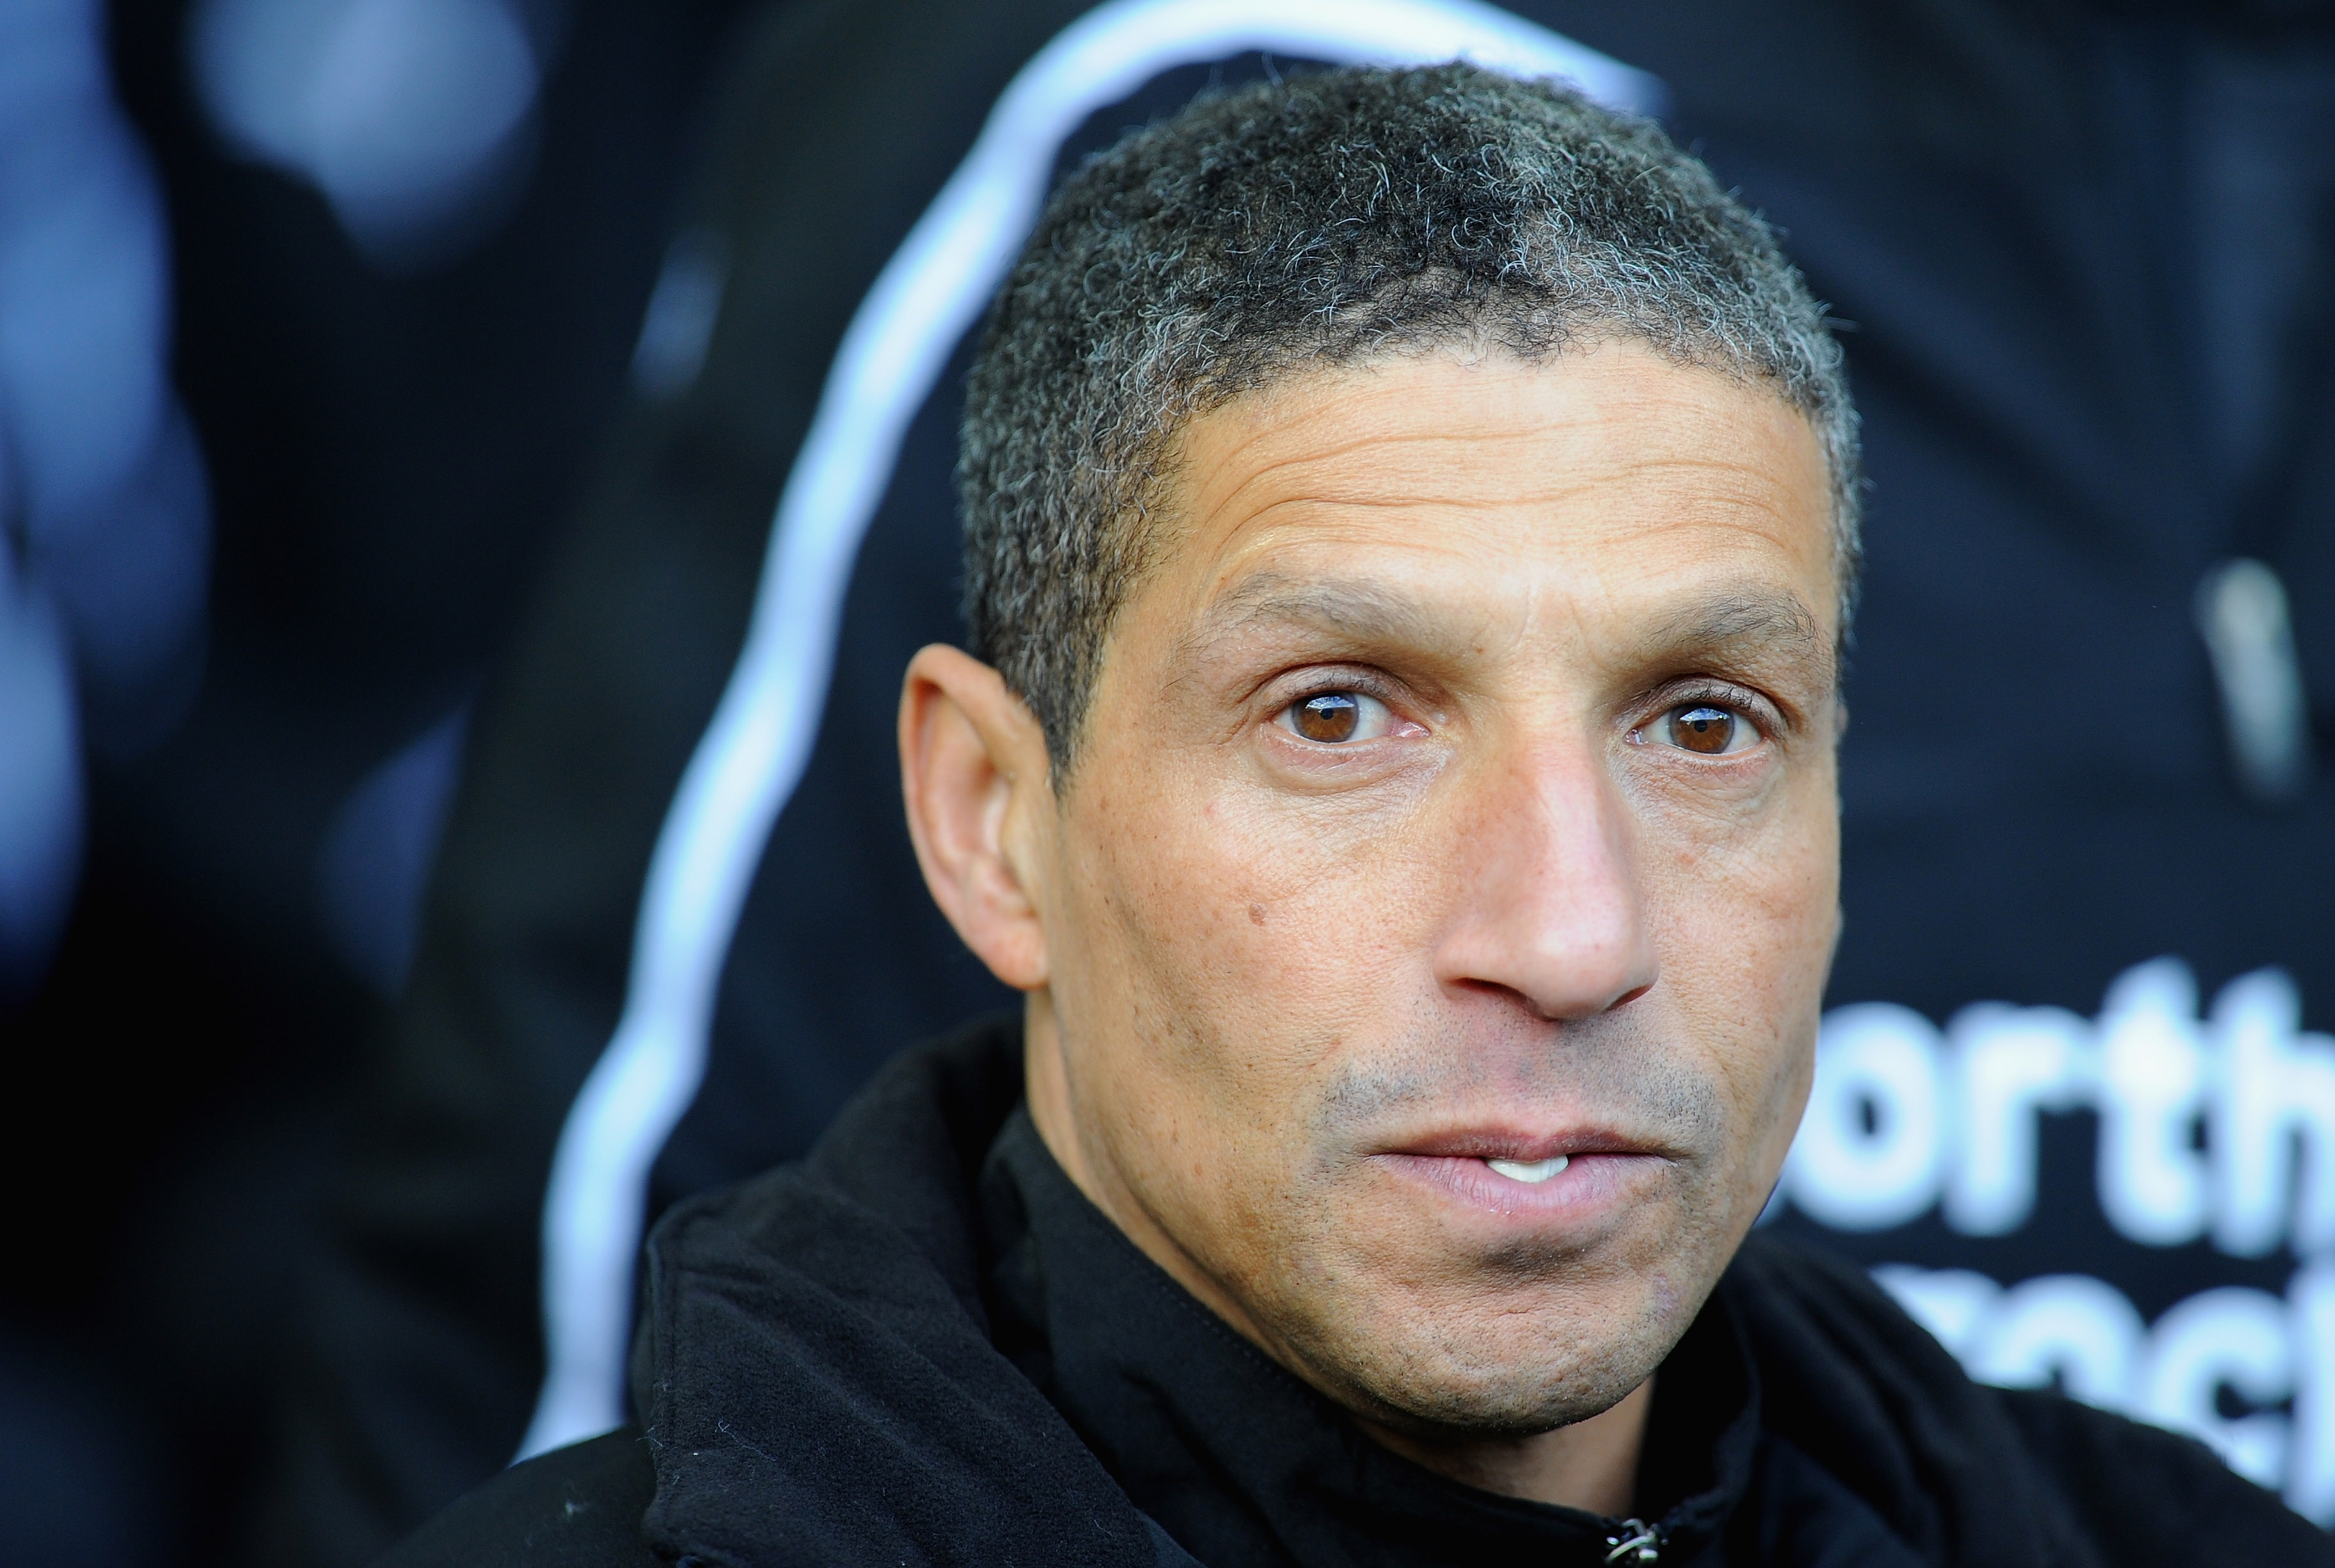 WEST BROMWICH, ENGLAND - DECEMBER 05:  Chris Hughton of Newcastle United looks on before the Barclays Premier League match between West Bromwich Albion and Newcastle United at The Hawthorns on December 5, 2010 in West Bromwich, England.  (Photo by Clive M